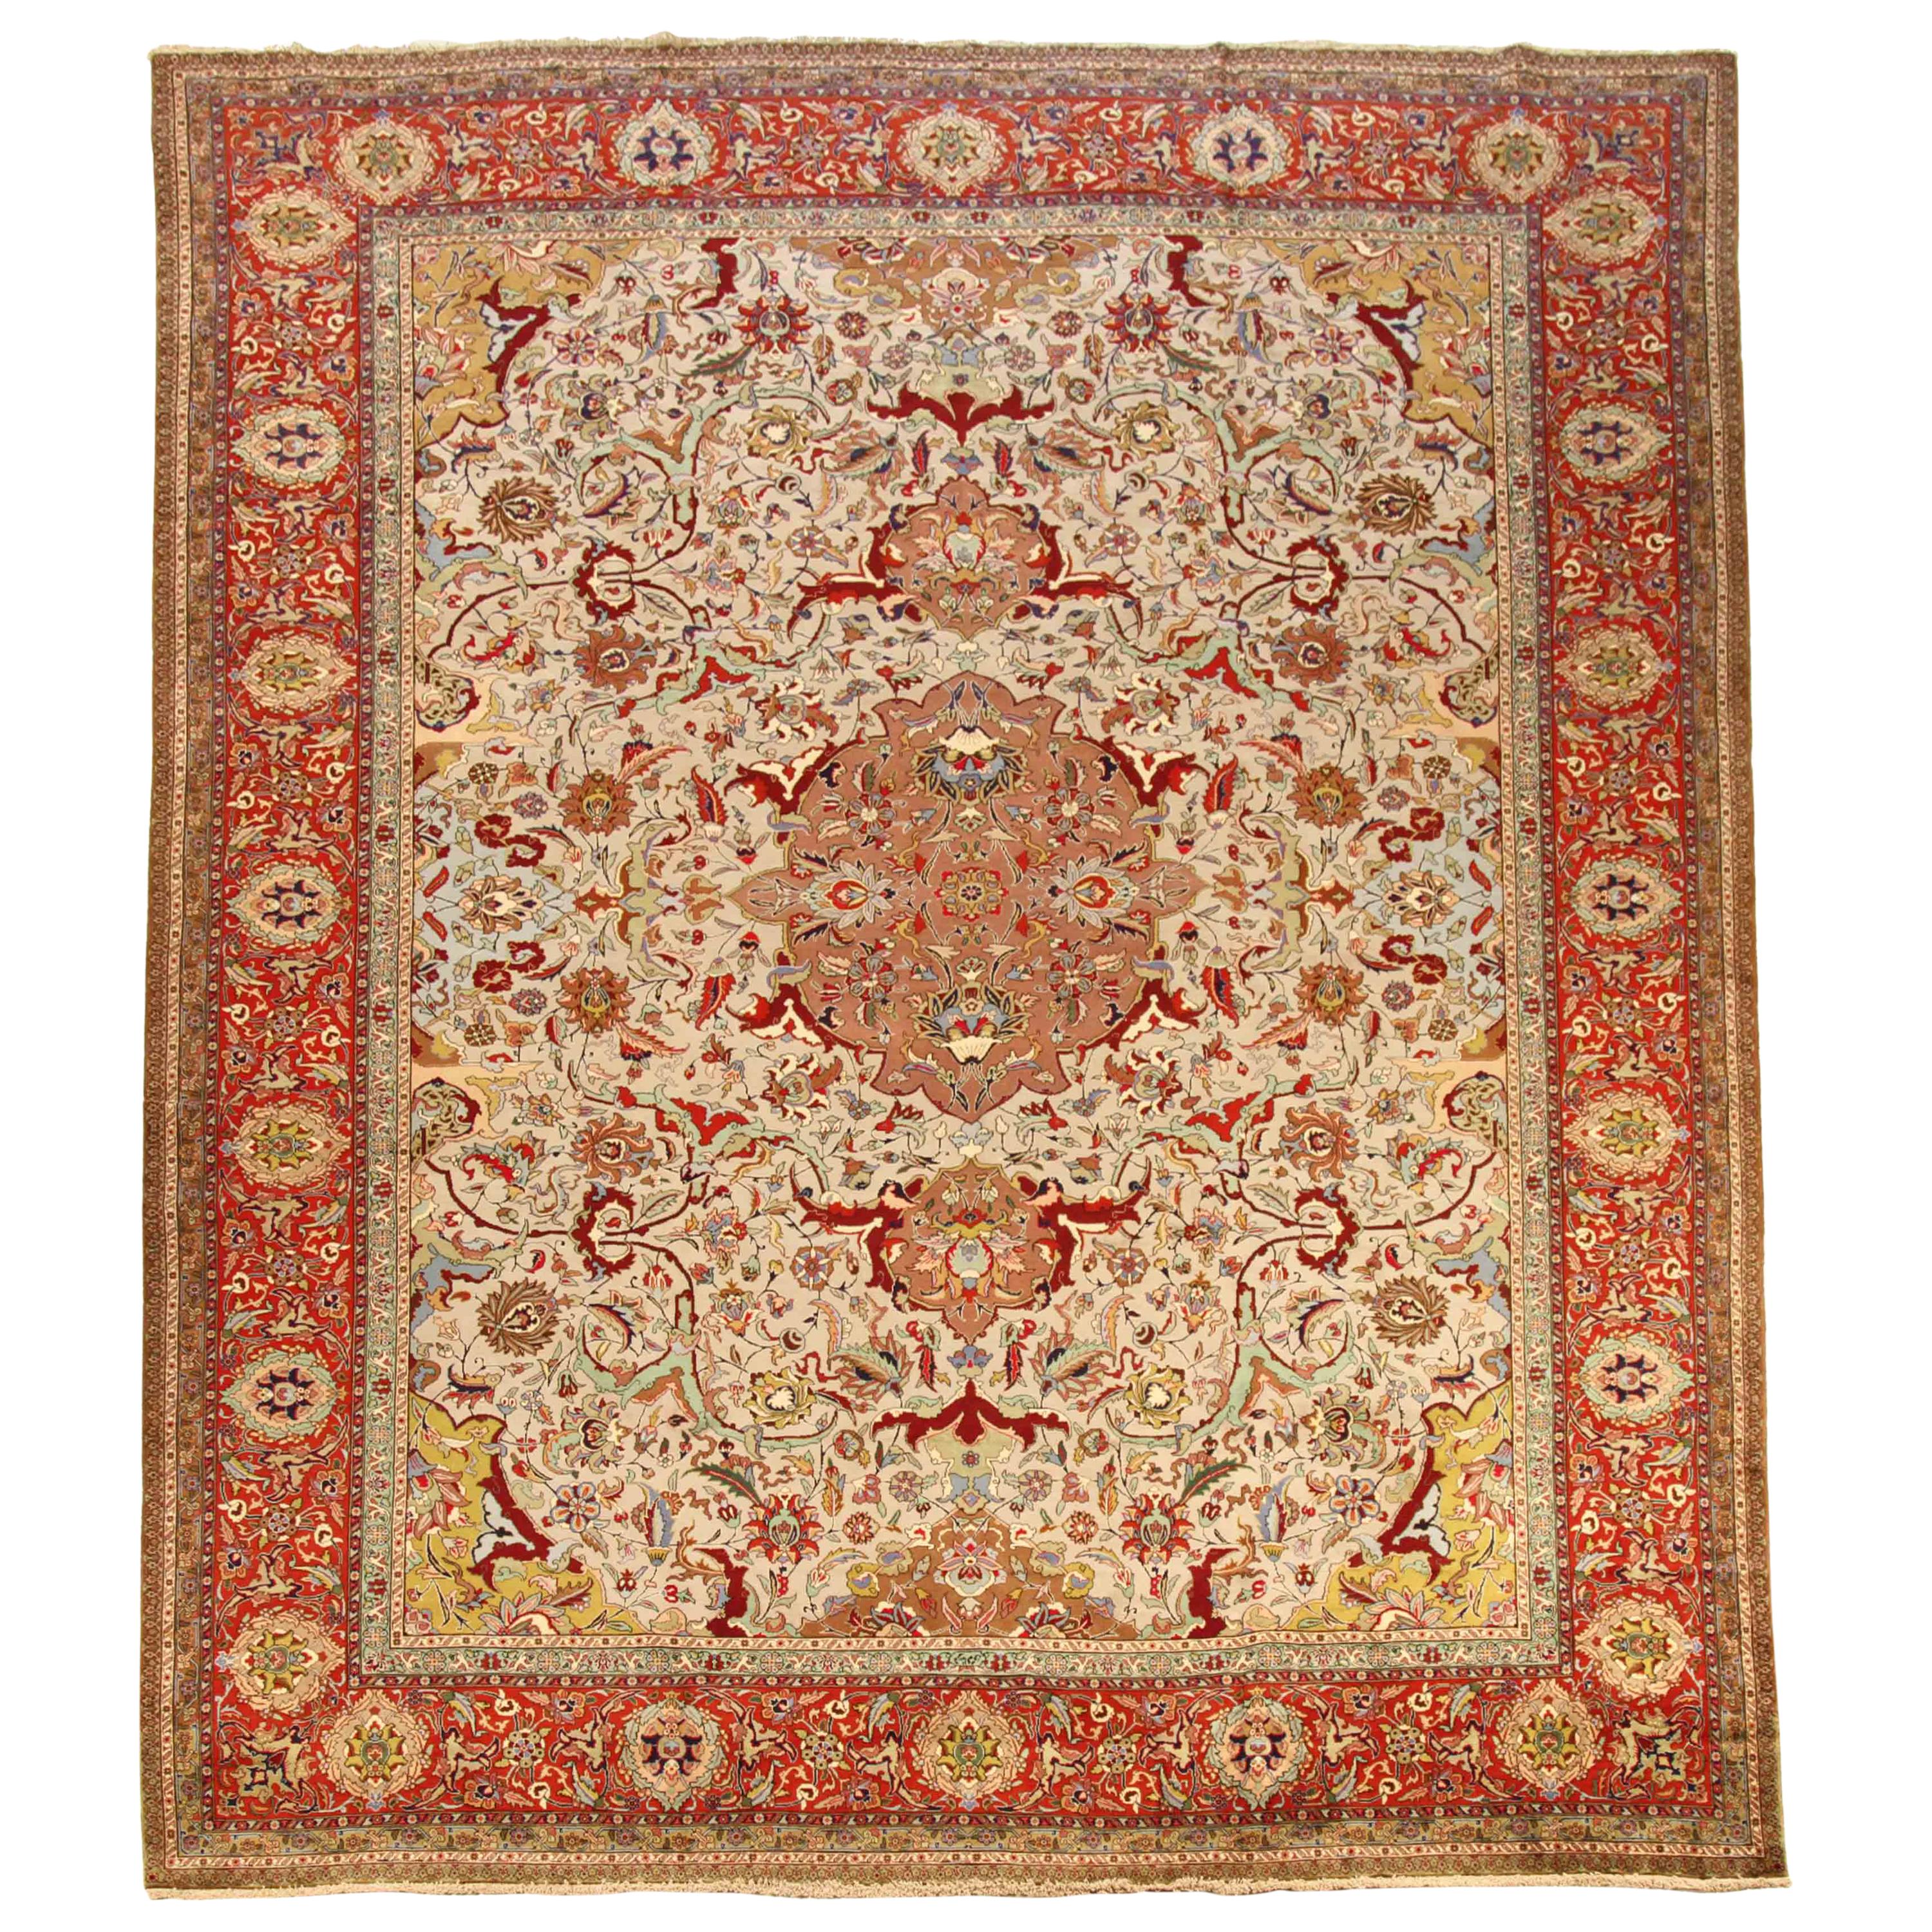 Antique Persian Tabriz Rug with Ivory and Red Floral Patterns, circa 1960s For Sale